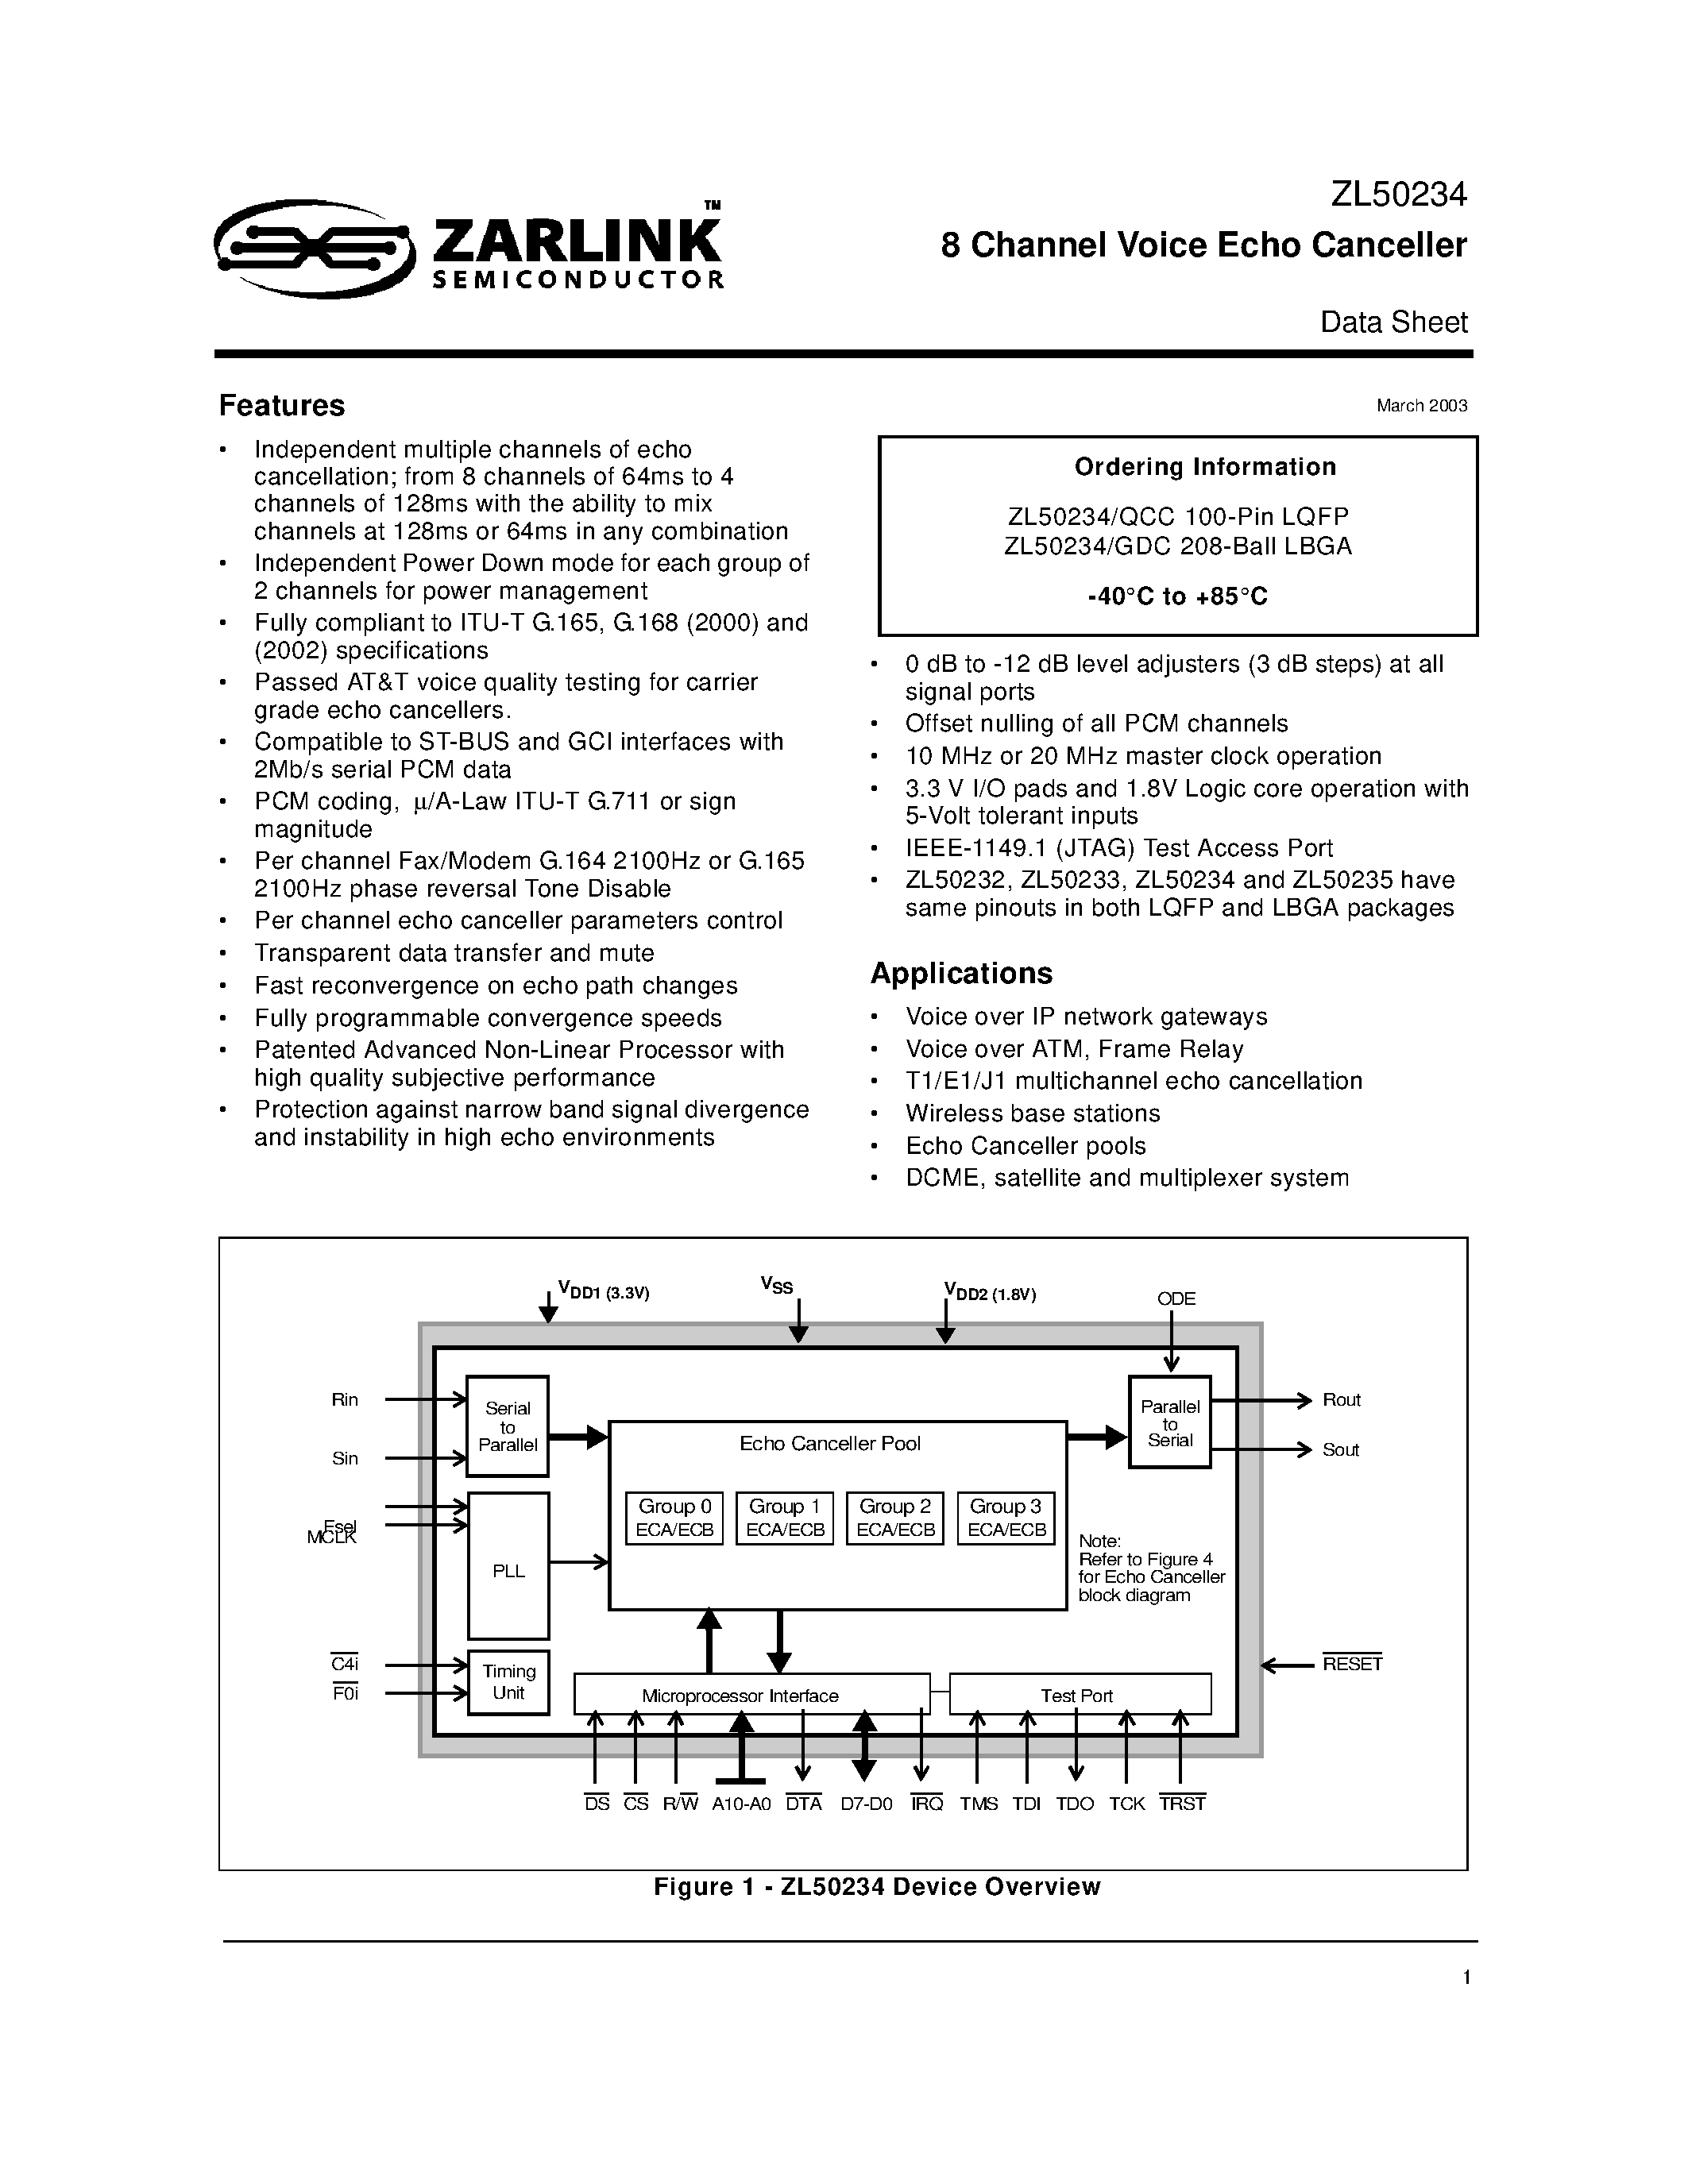 Datasheet ZL50234GD - 8 Channel Voice Echo Canceller page 1